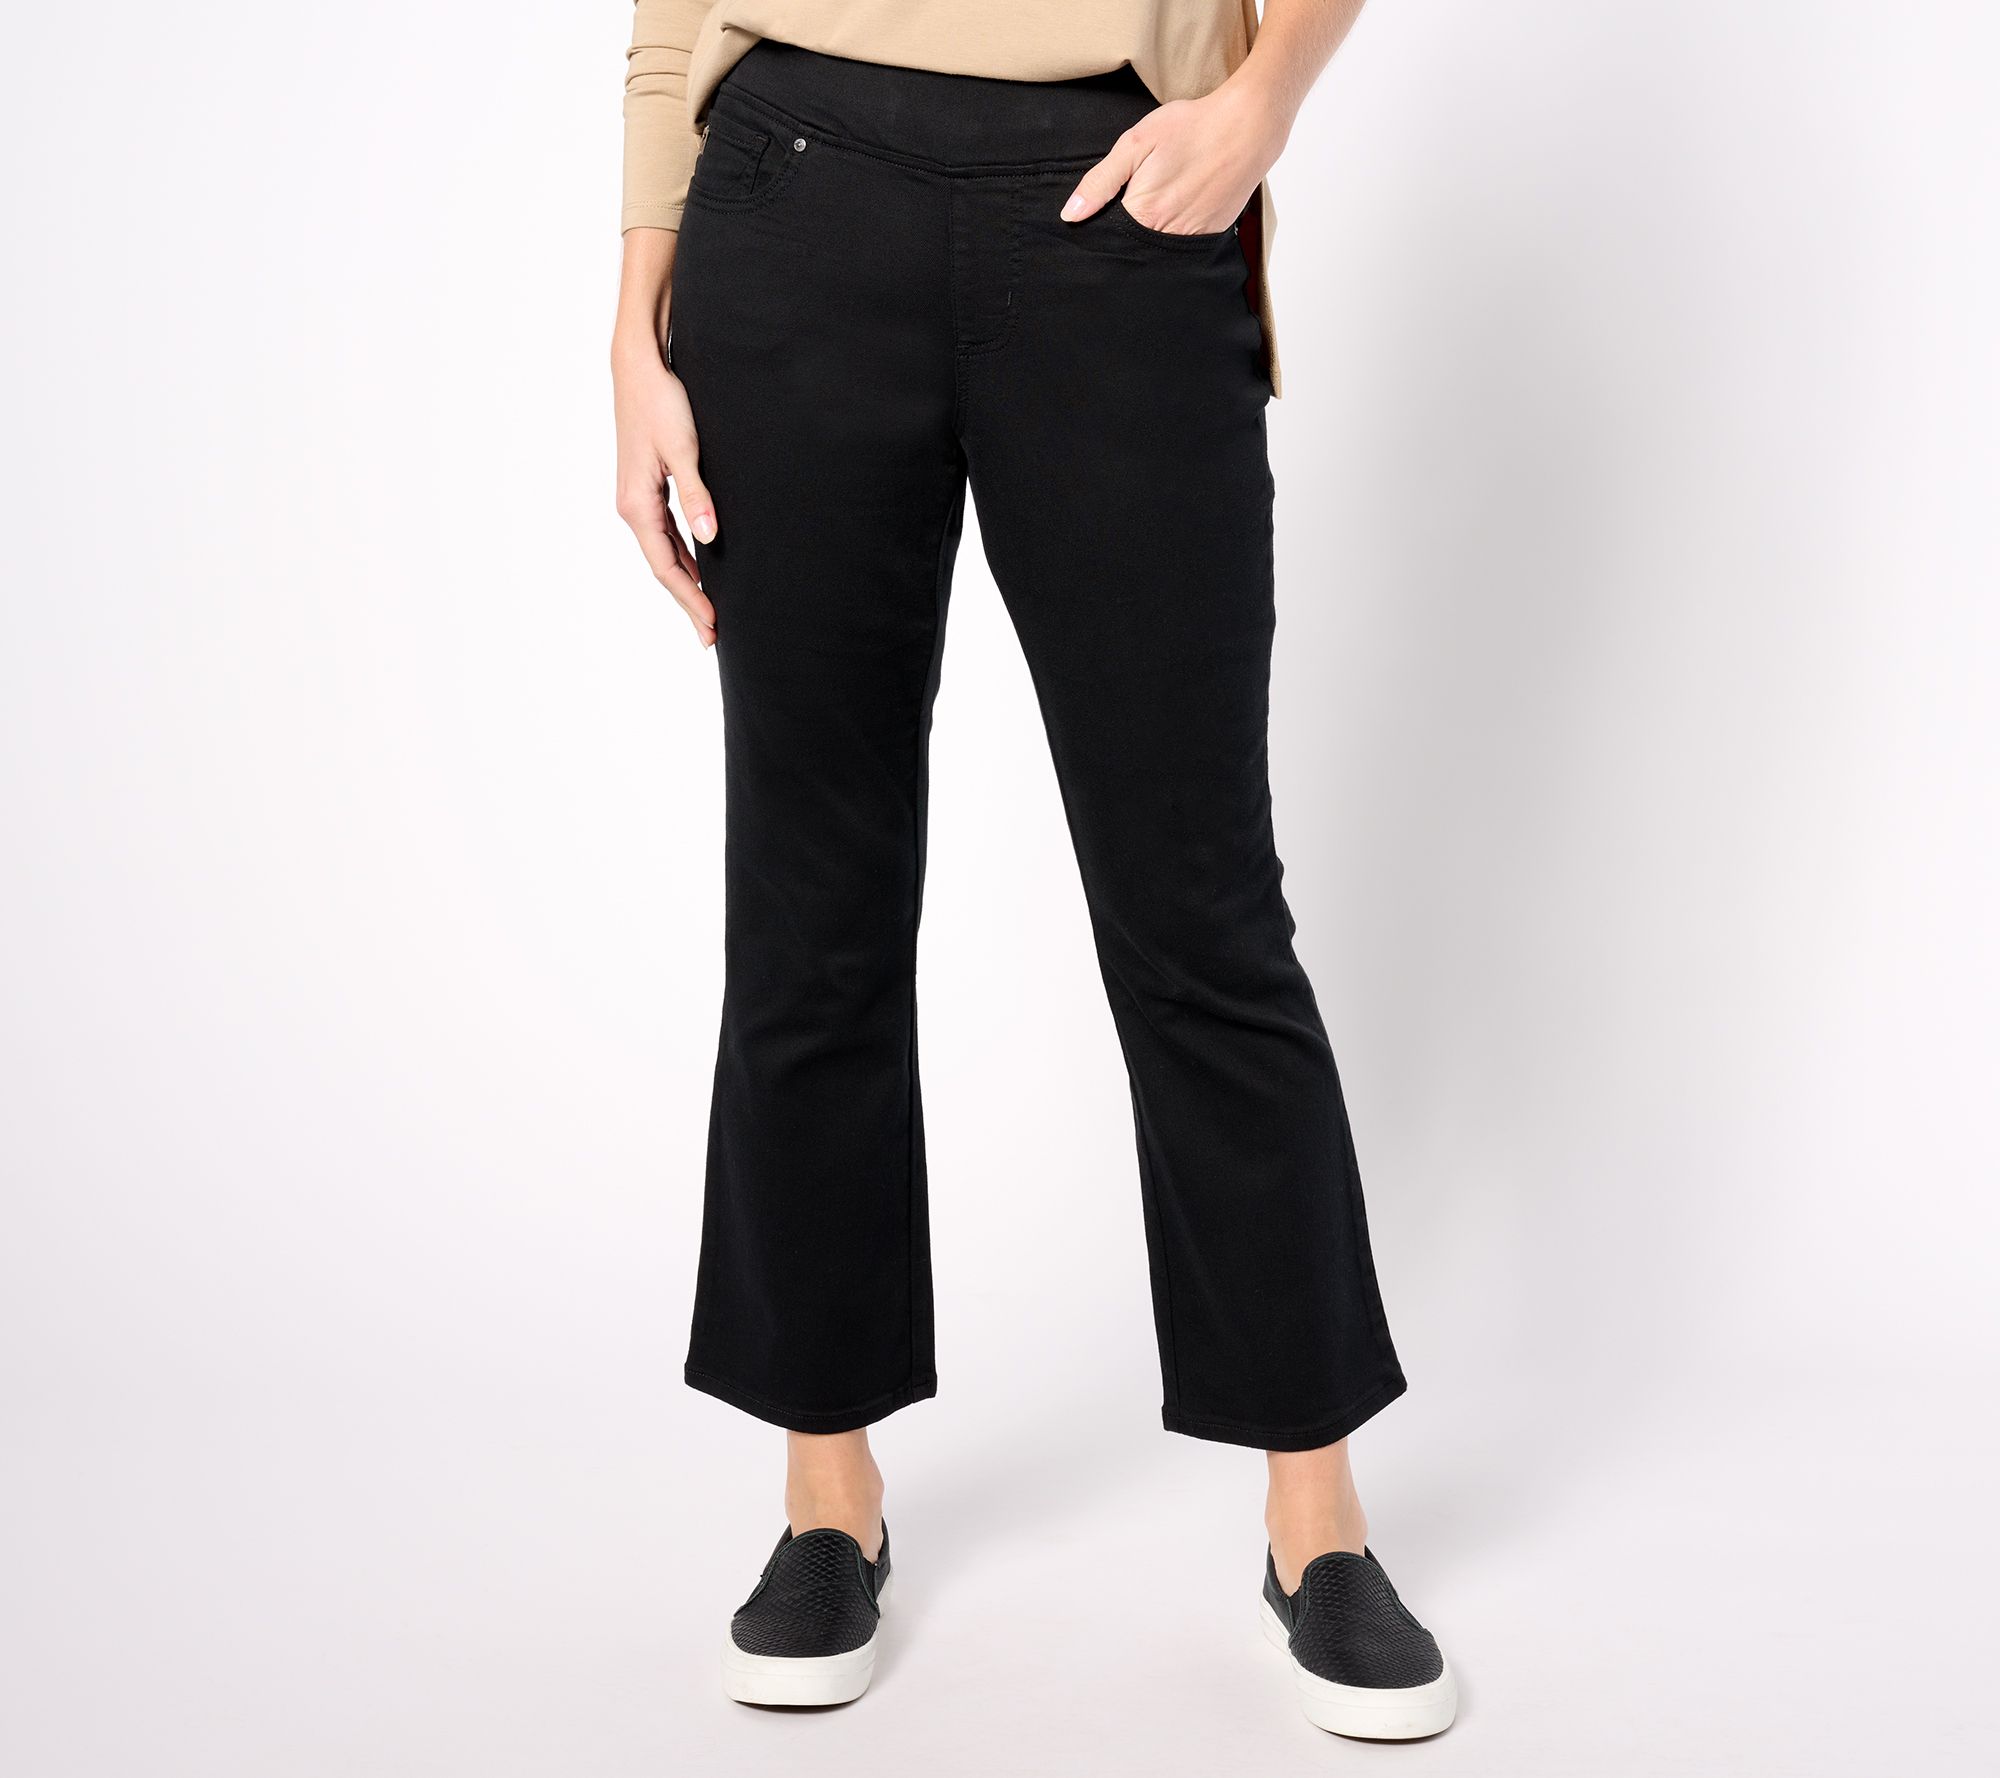 An honest review of Spanx jeans - Cheryl Shops